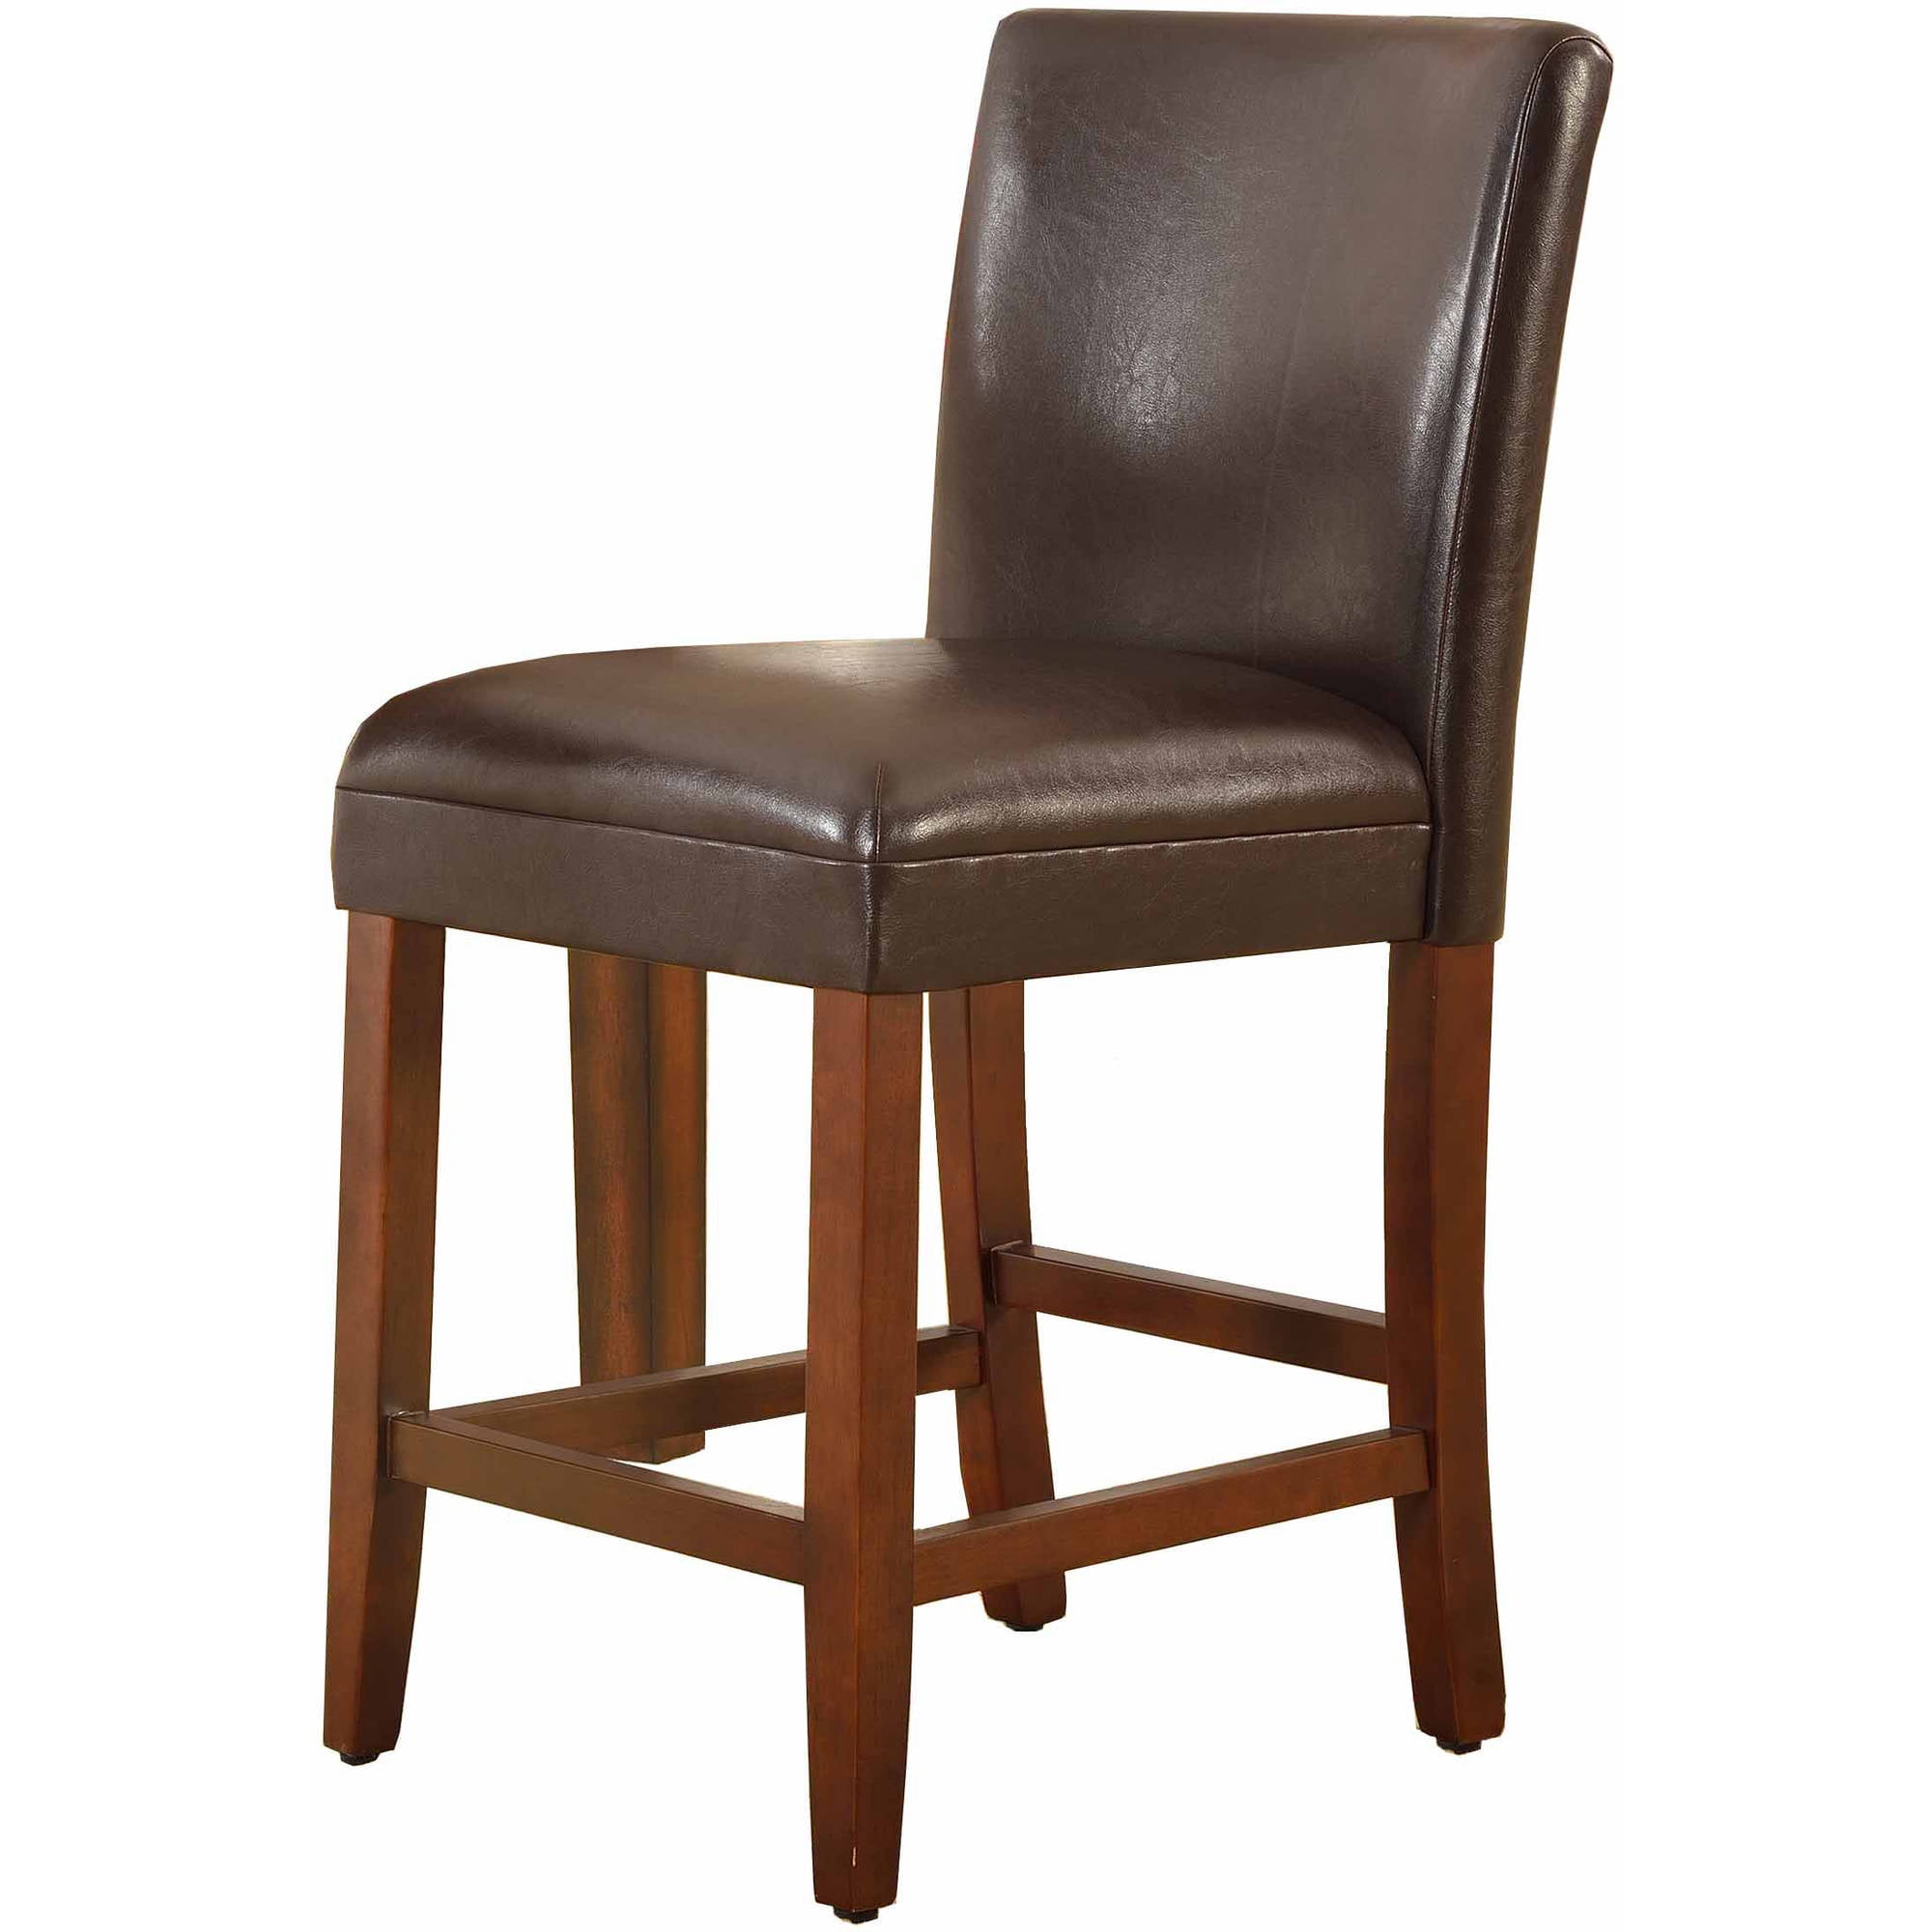 Homepop 24 Faux Leather Barstool, Brown Faux Leather Bar Stools